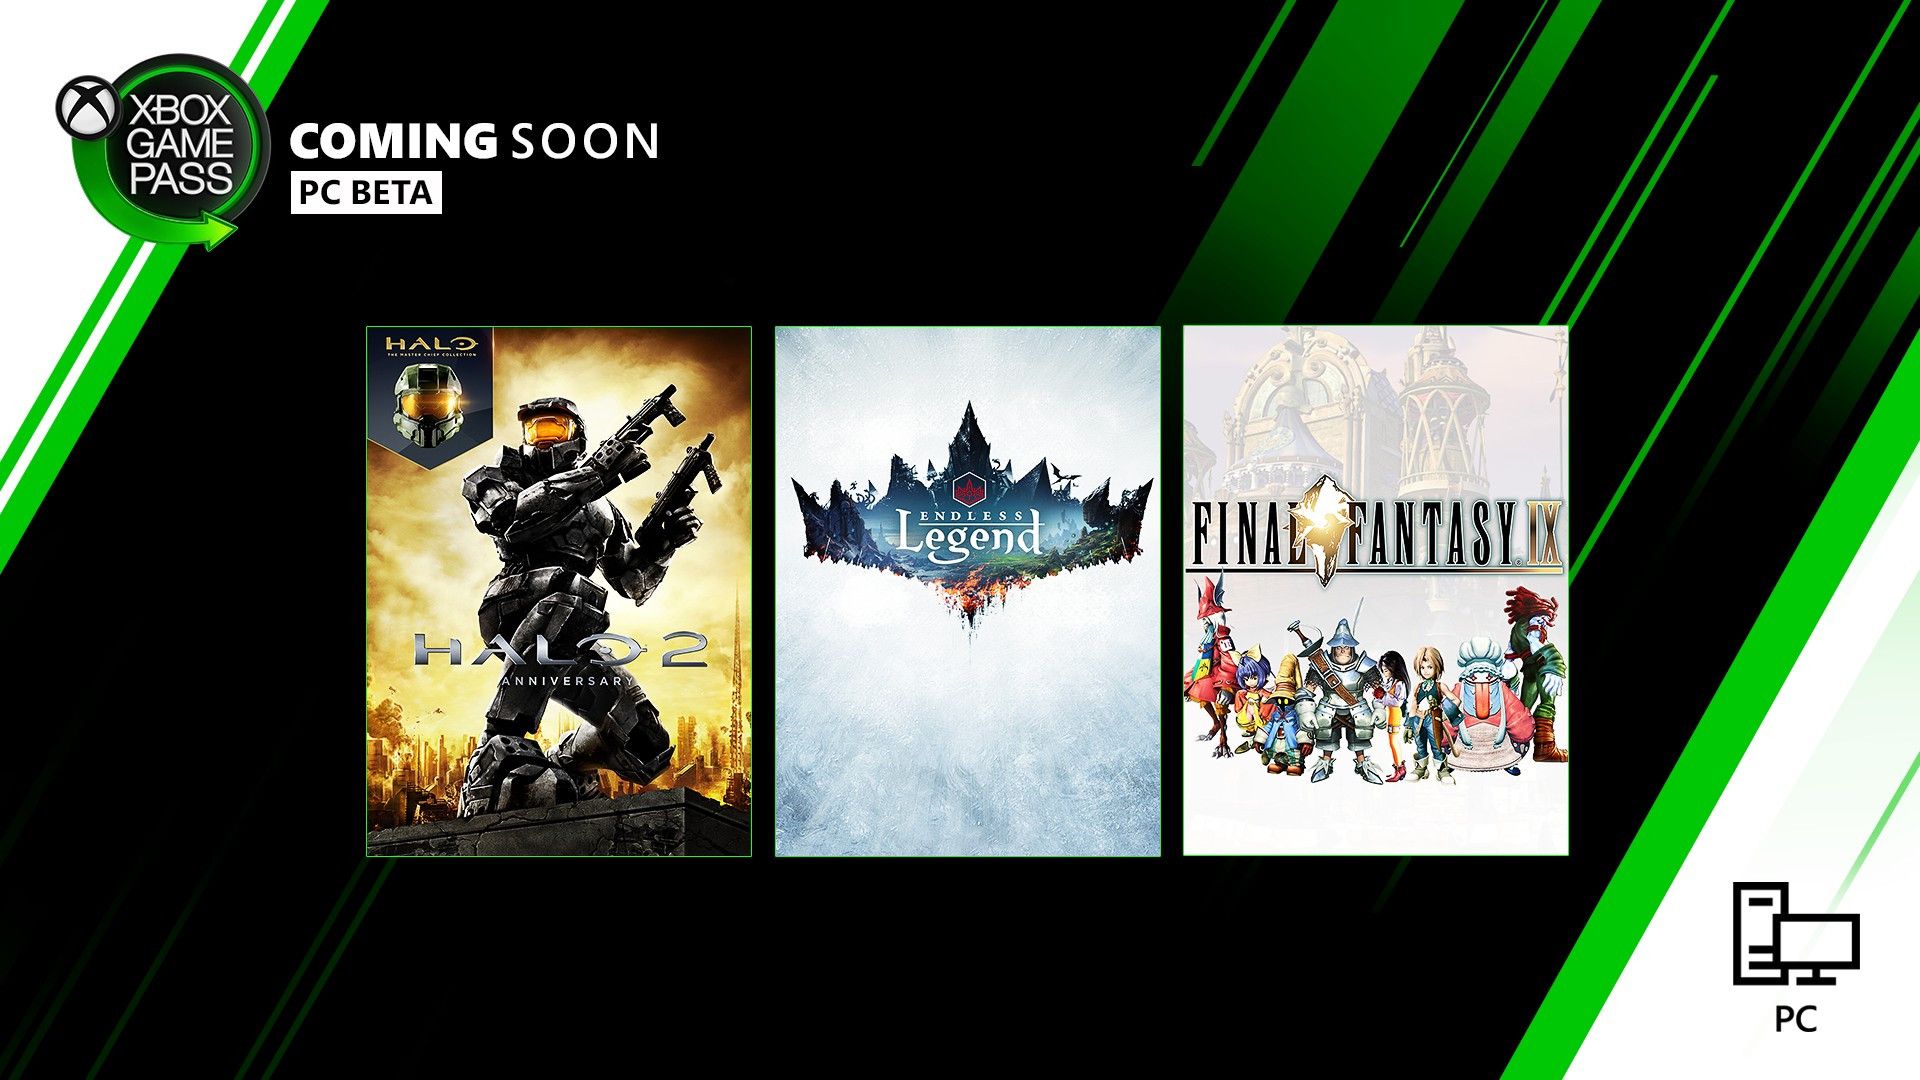 Coming Soon to Xbox Game Pass for PC (Beta): Final Fantasy IX, Halo MCC: Halo and More